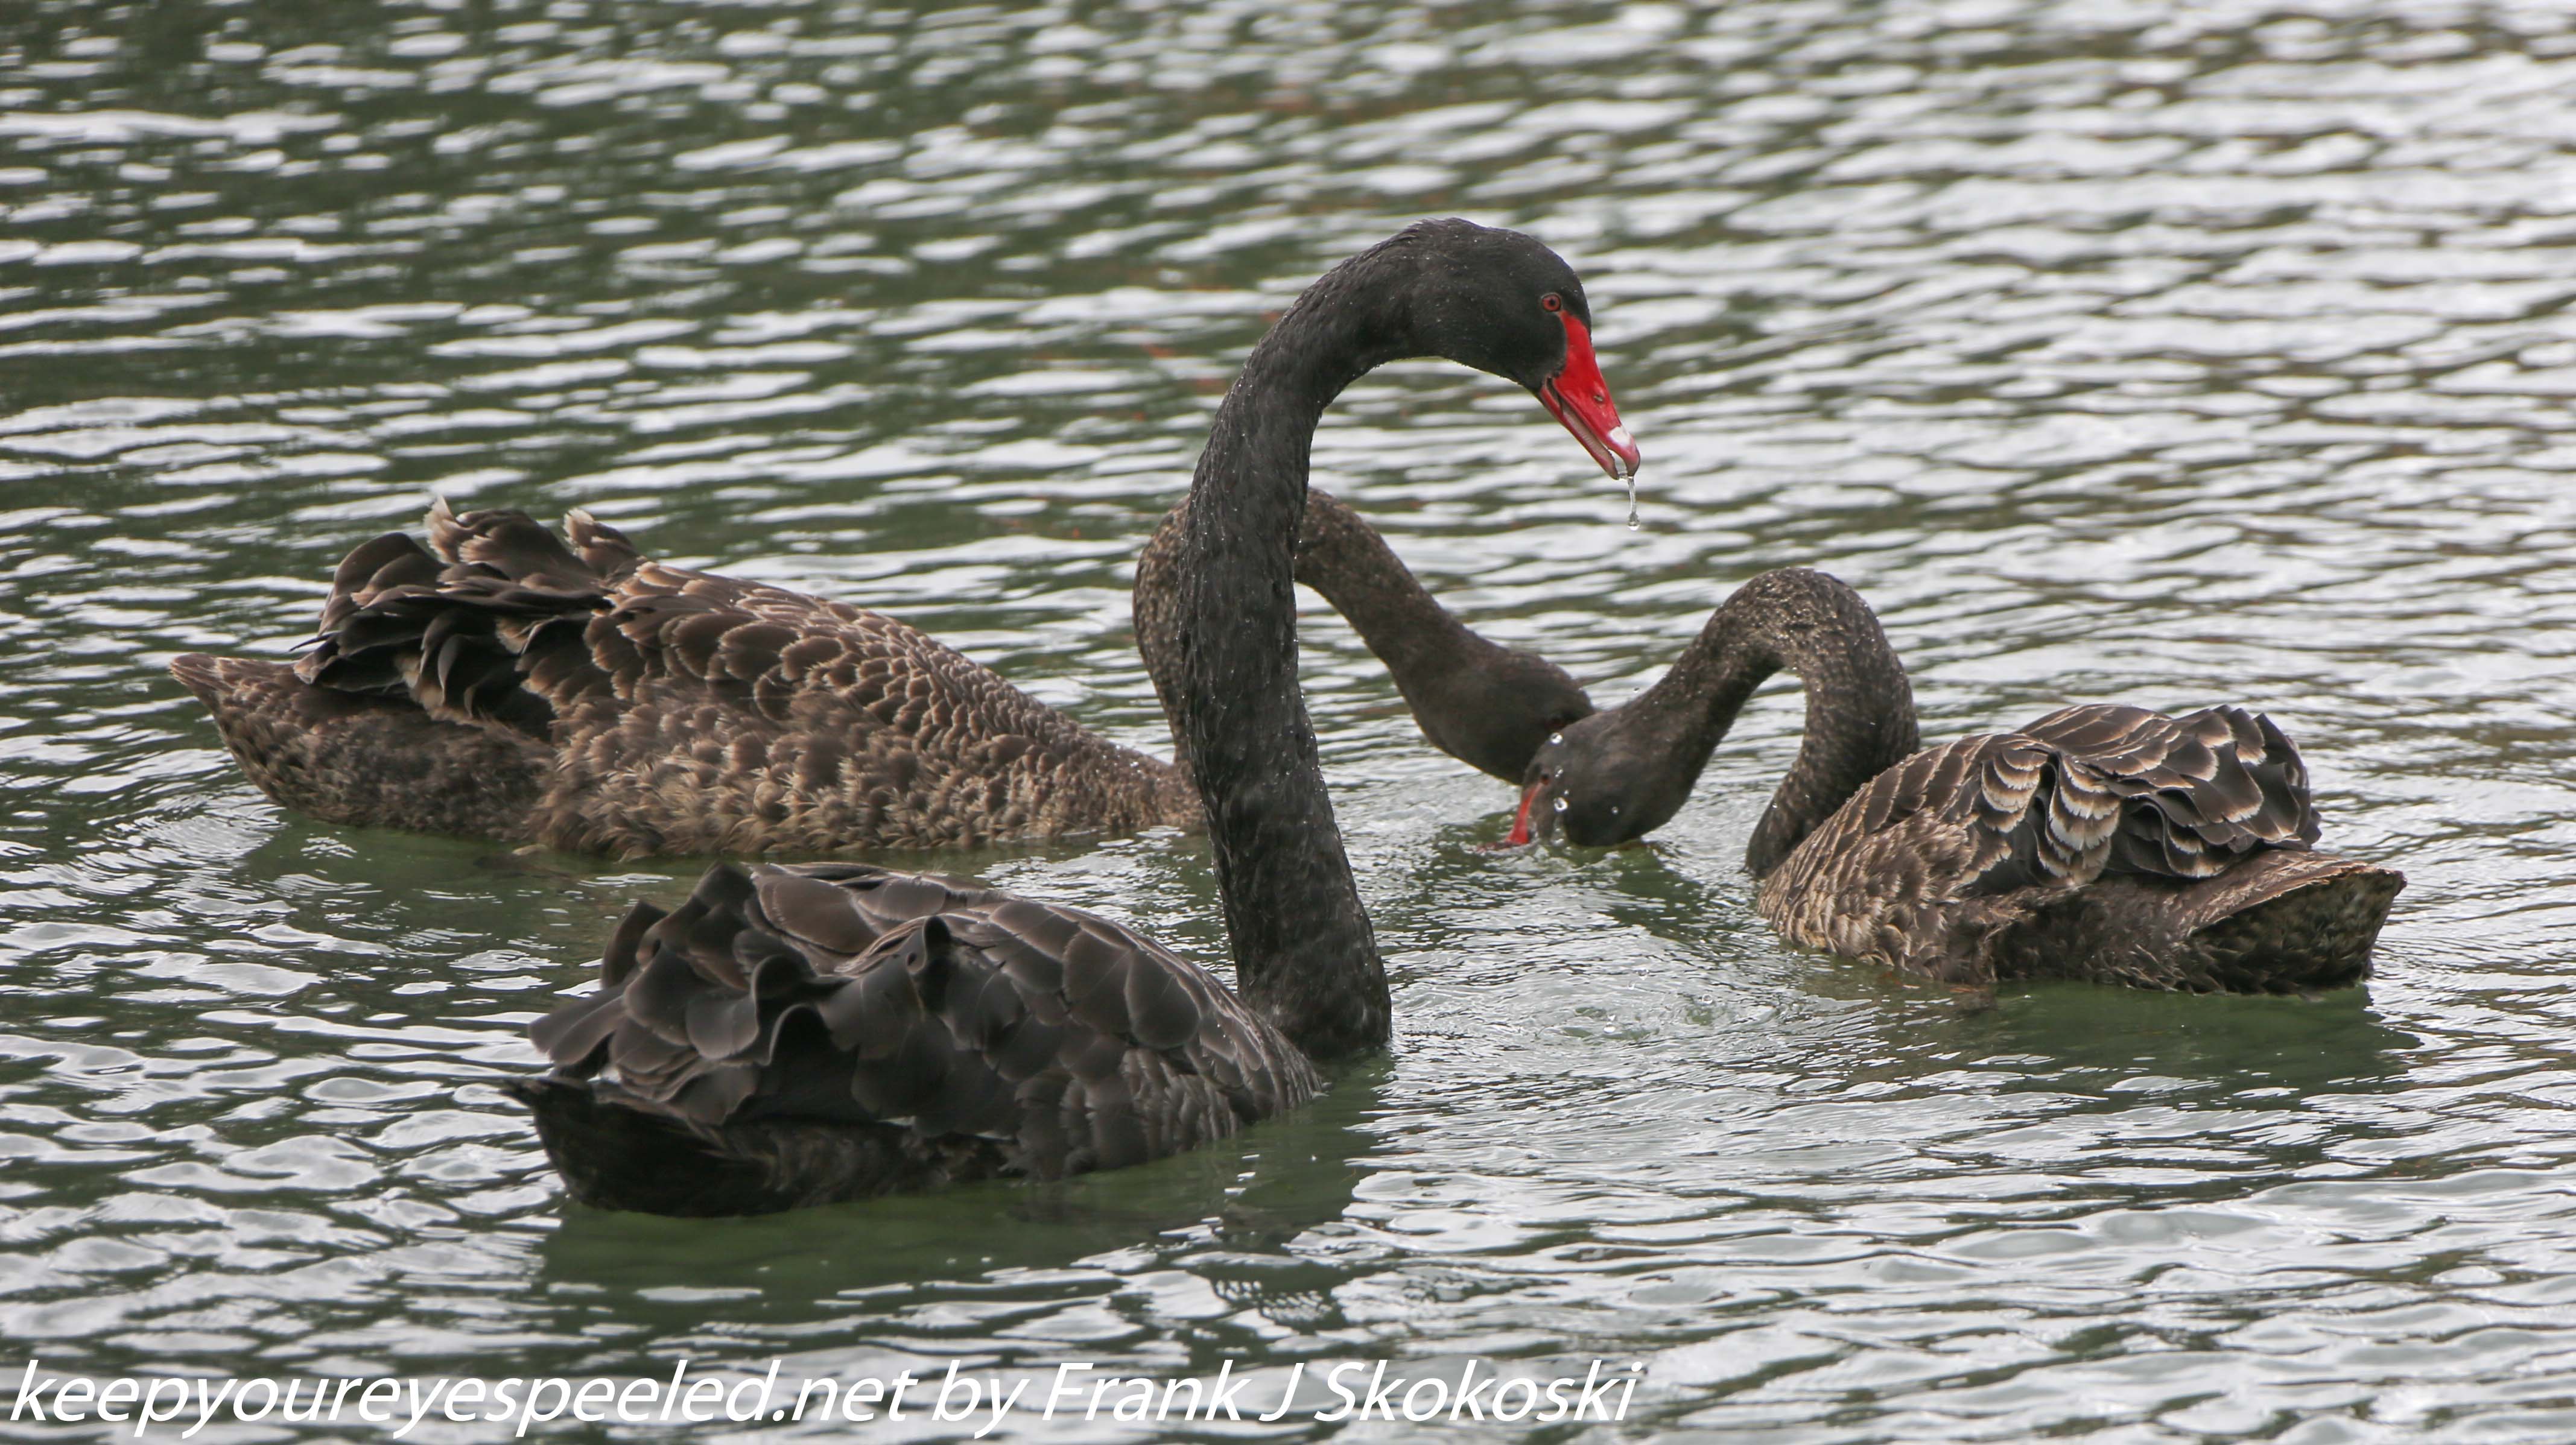 New-Zealand-Day-Seven-Glenorchy-black-swan-11-of-12